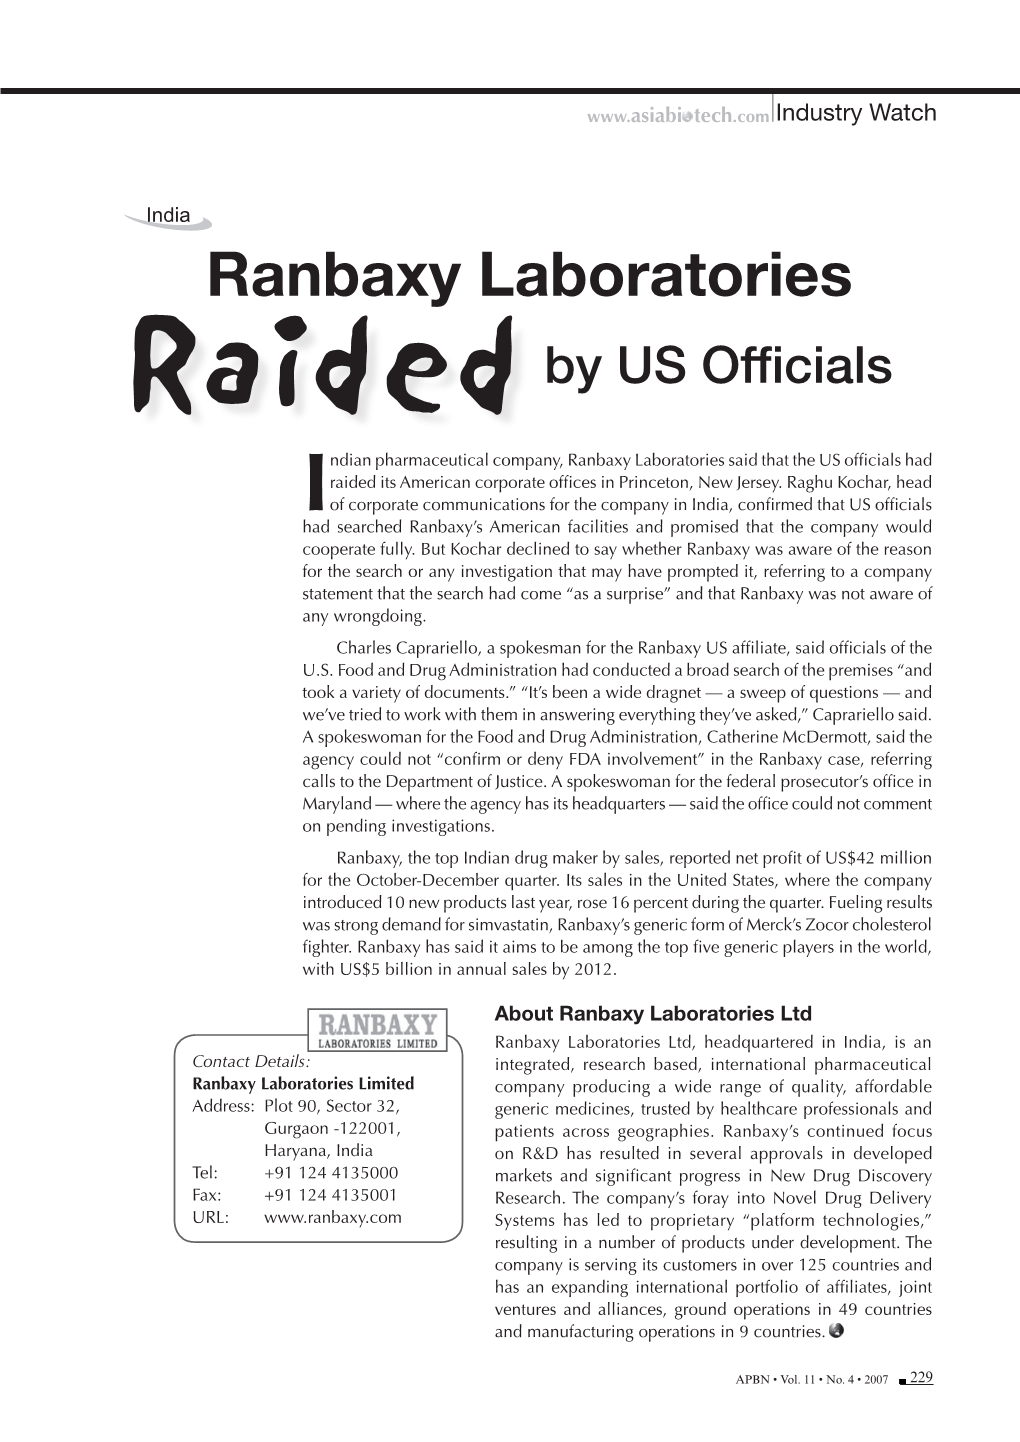 Ranbaxy Laboratories Raided by US Officials